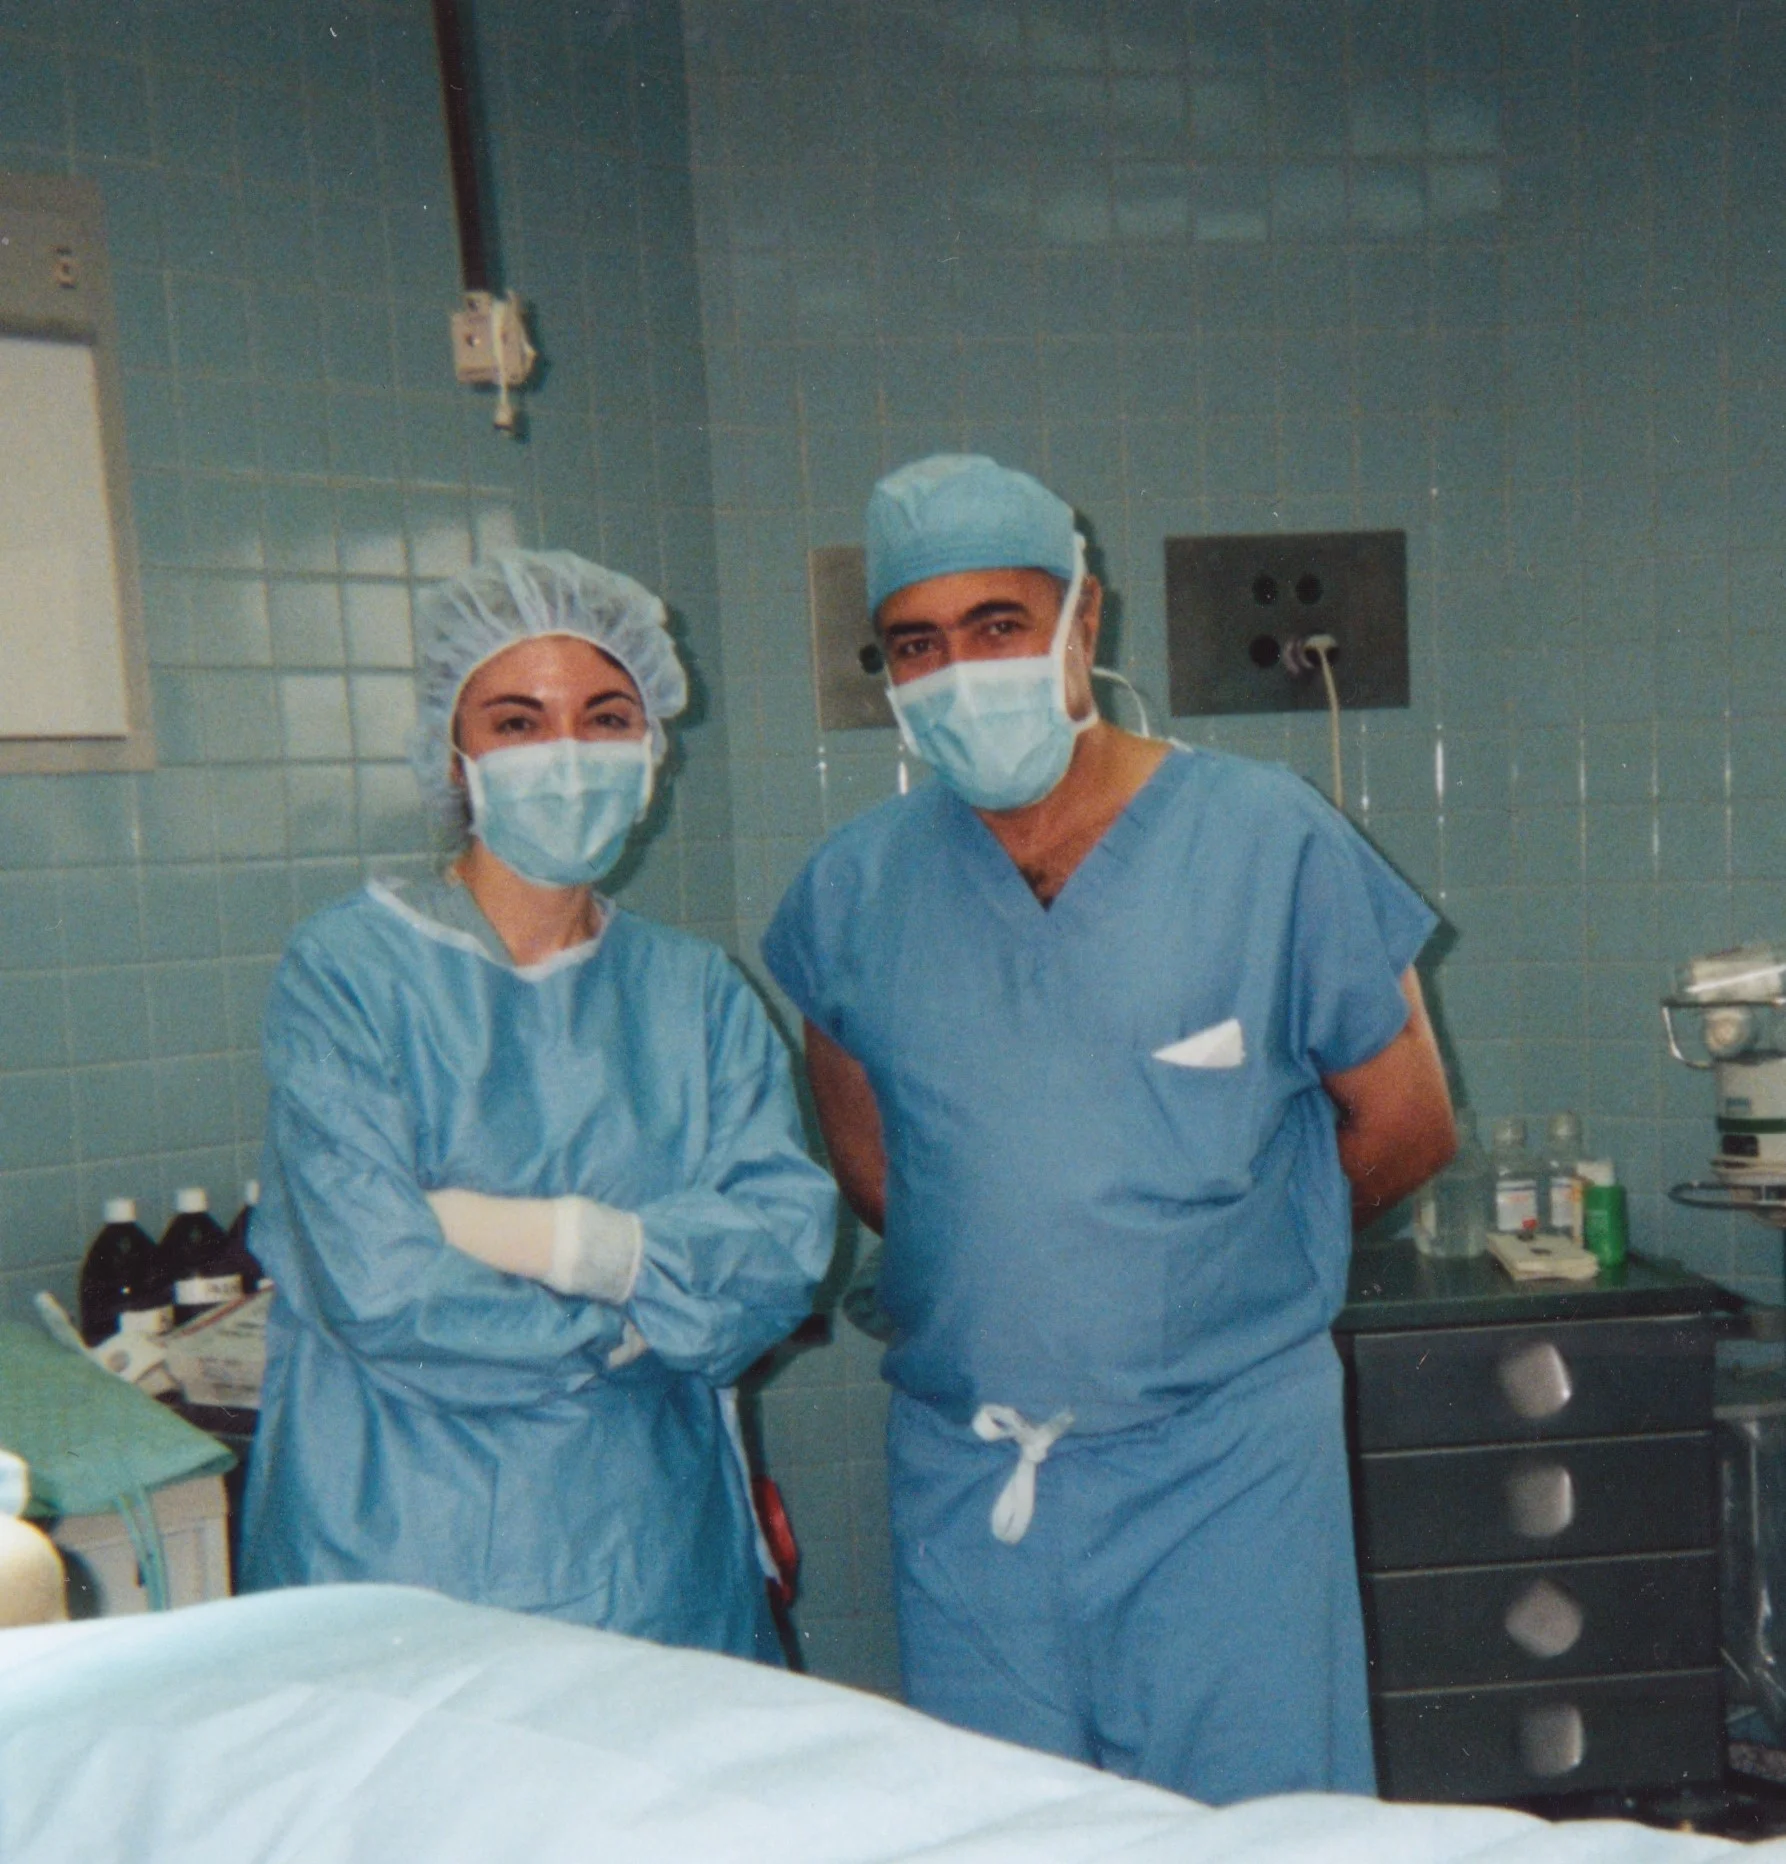 Two people in scrubs inside an operating room